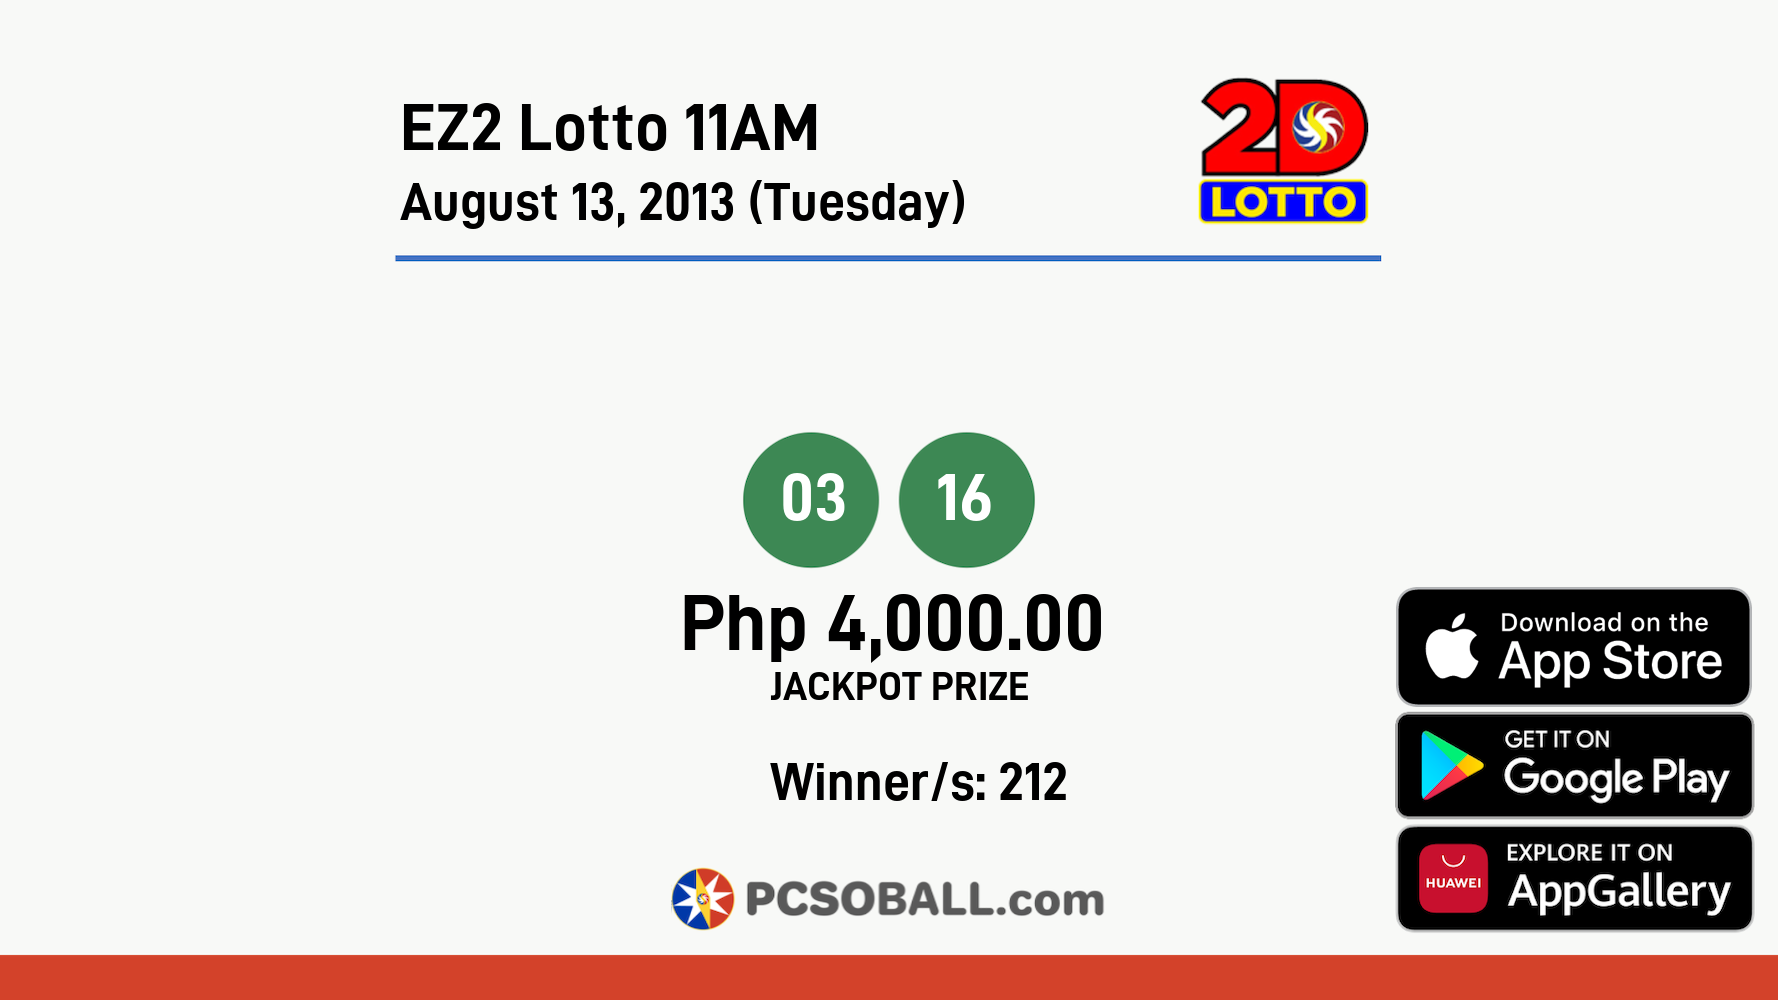 EZ2 Lotto 11AM August 13, 2013 (Tuesday) Result